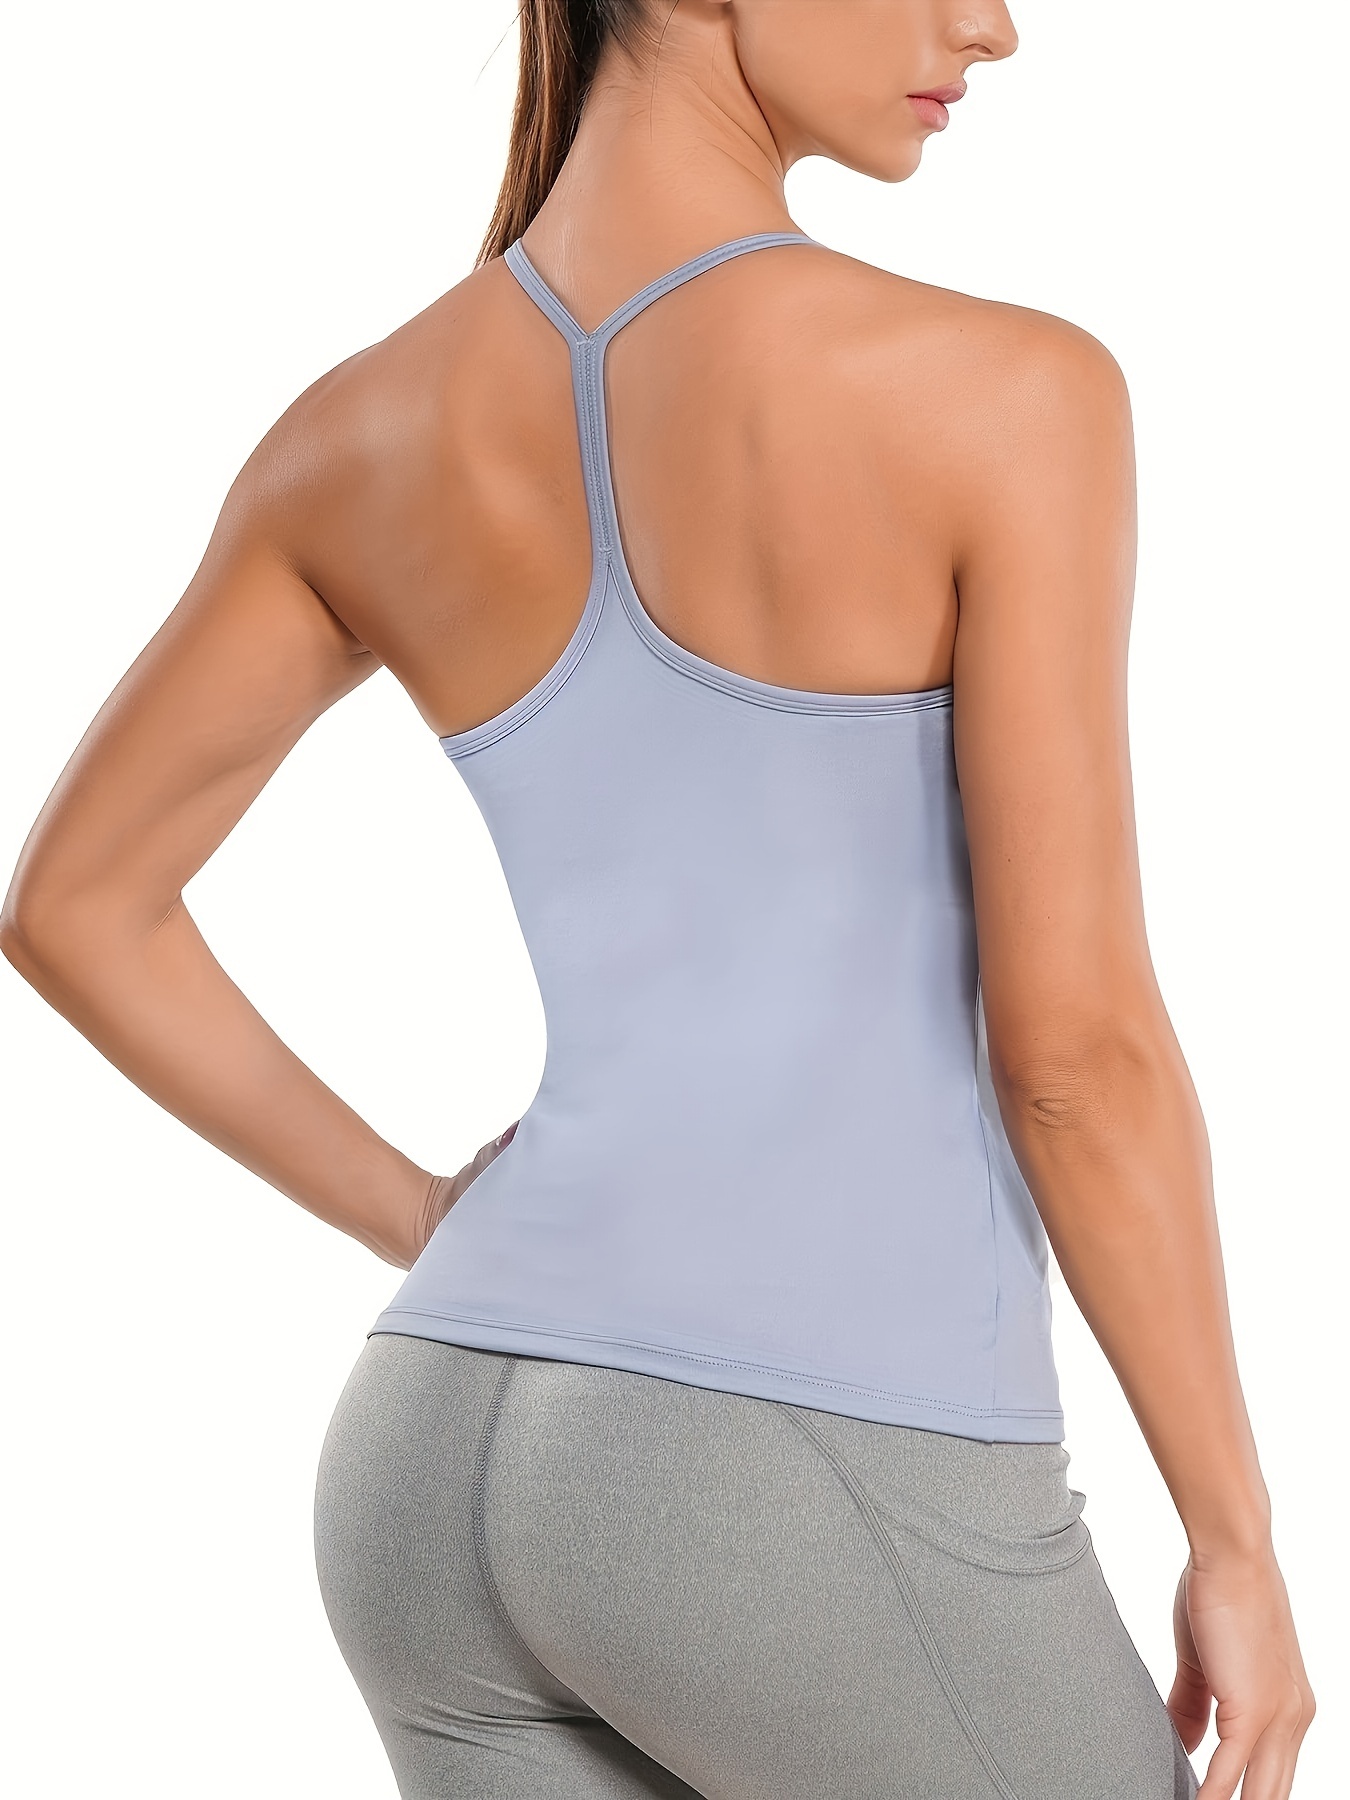 Workout Tank Tops For Women, Built In Bra Cami Top Yoga Shirts, Athletic  Racerback Tank Running Sports Clothes